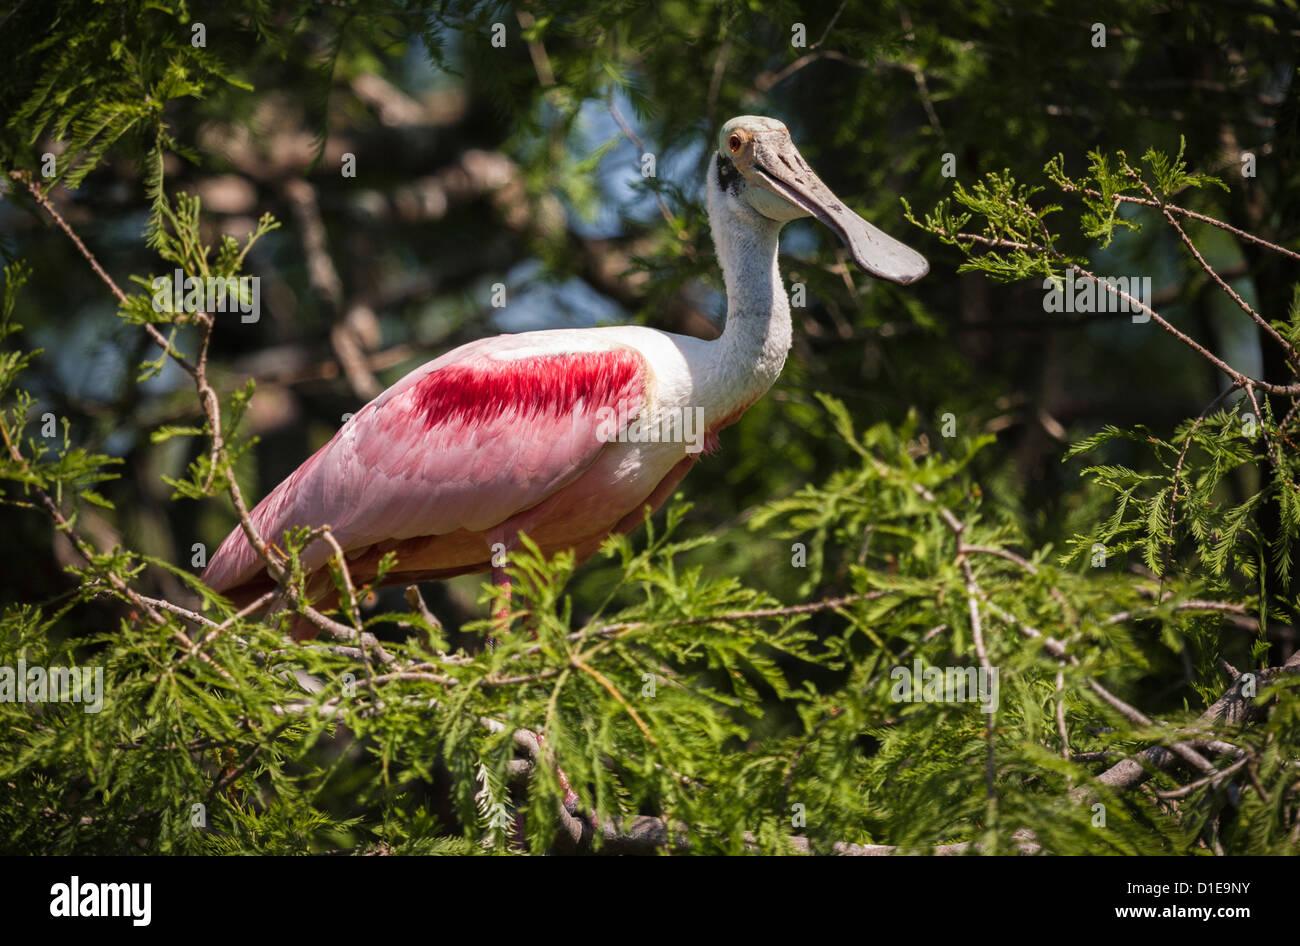 Roseate Spoonbill (Platalea ajaja) perched in tree at St. Augustine Alligator Farm Zoological Park in St. Augustine, Florida Stock Photo